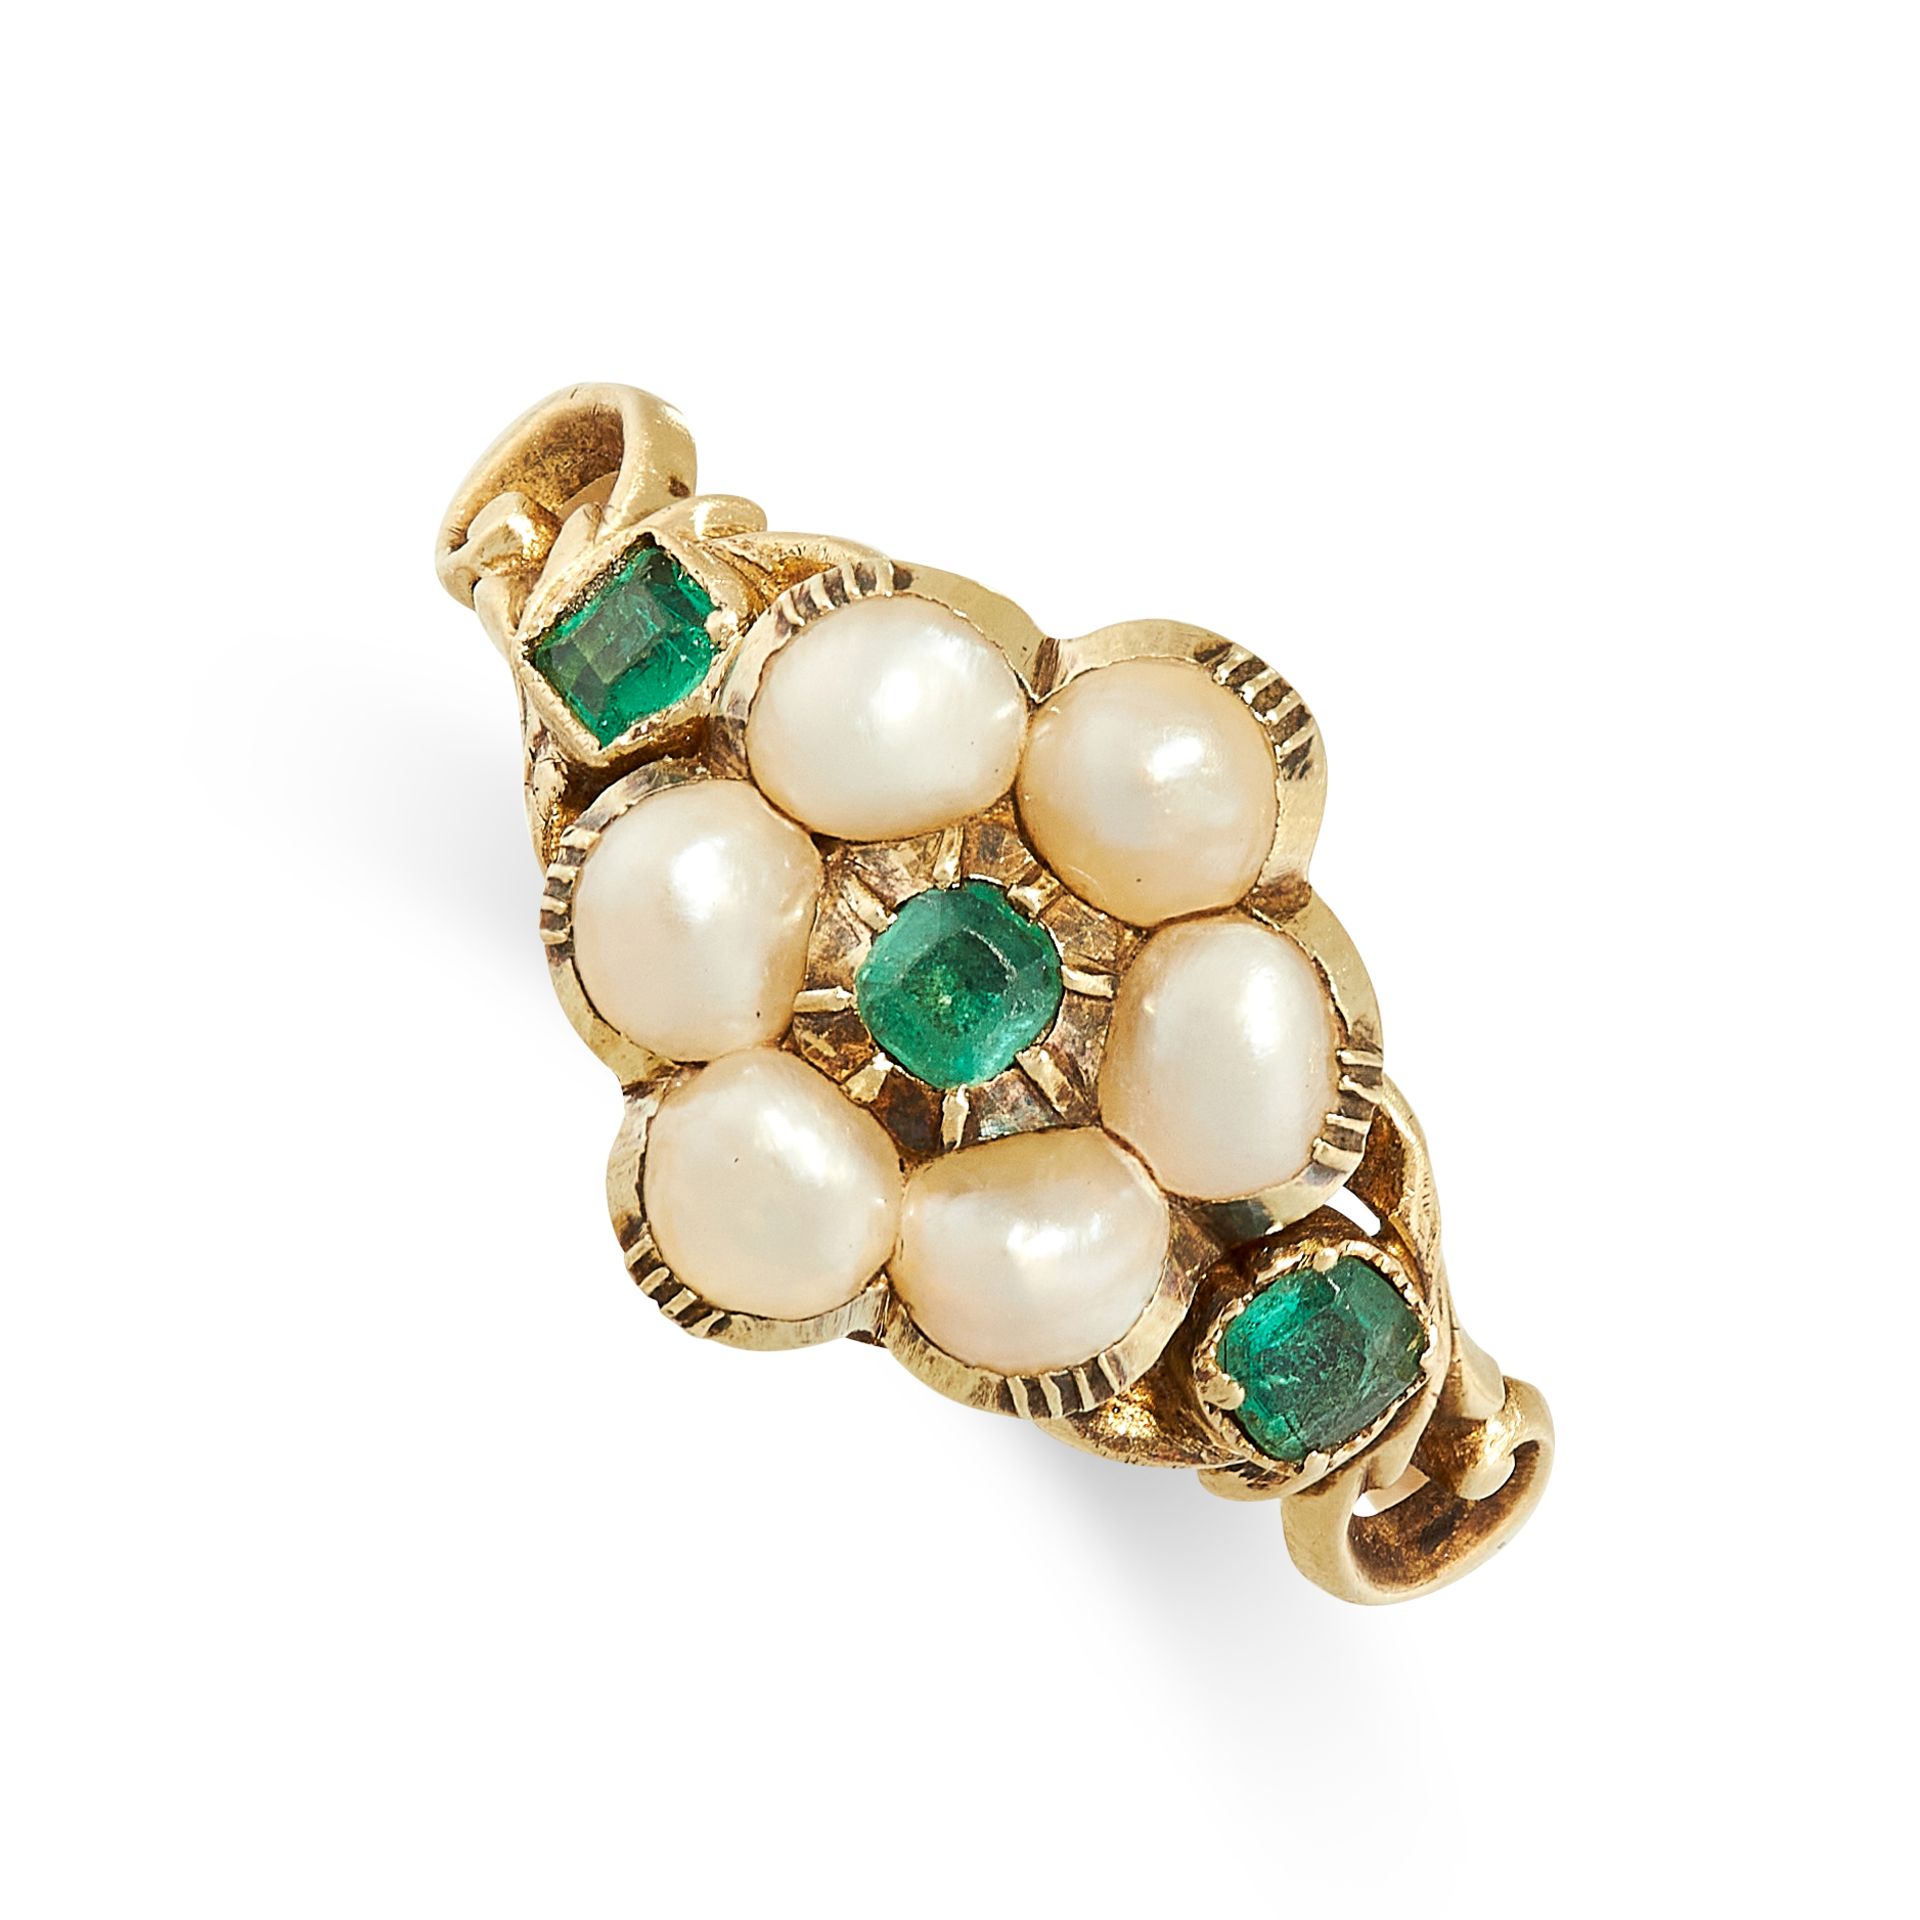 ANTIQUE EMERALD AND PEARL MOURNING LOCKET RING, 19TH CENTURY in yellow gold, set with a central